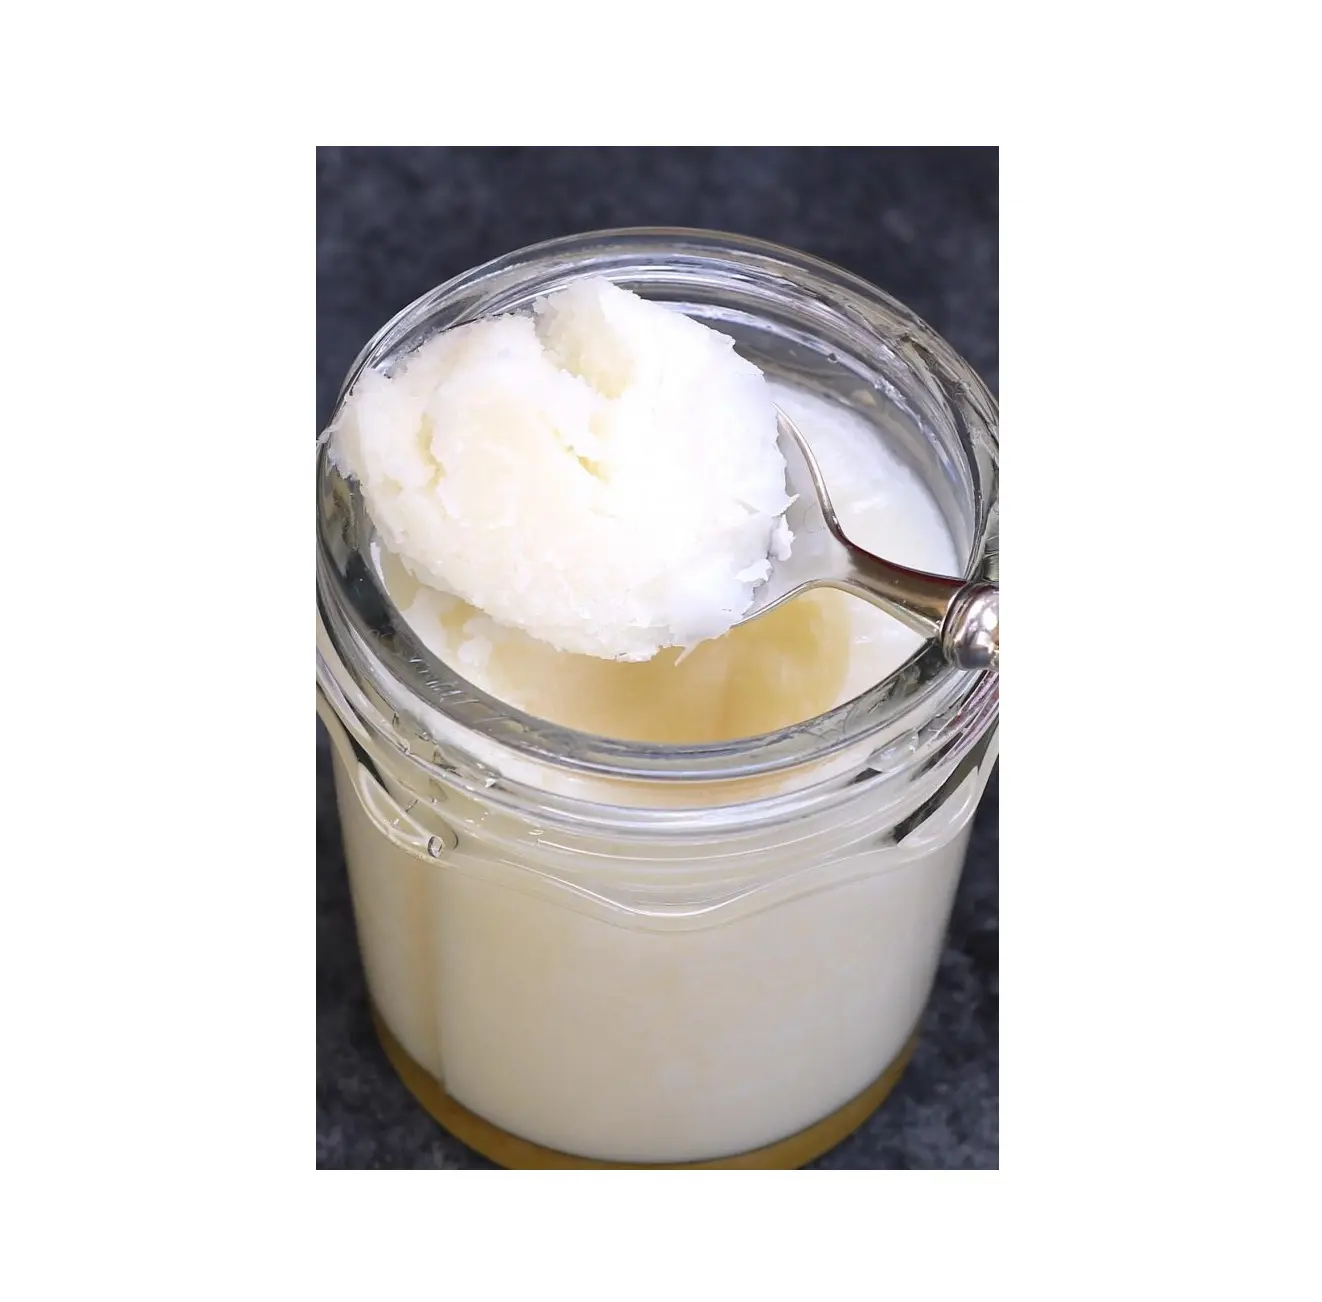 Beef Tallow for Soap | Beef Tallow oil |Tallow Fat